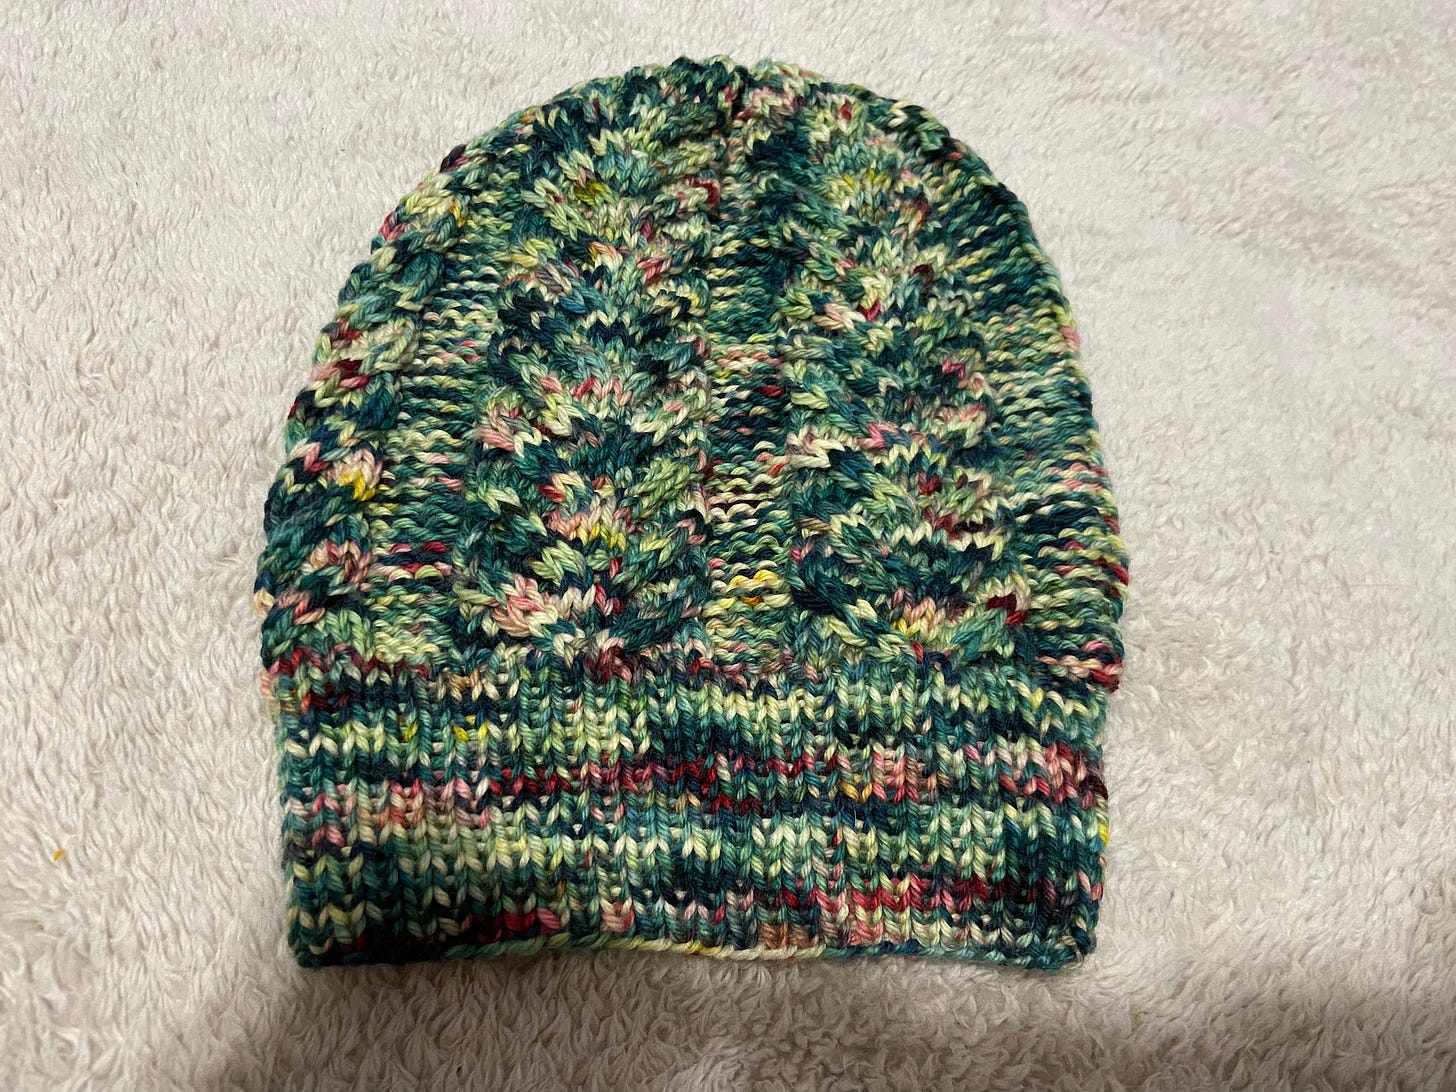 A cable hat knitted in variegated greens and reds laying on a cream-colored throw blanket.